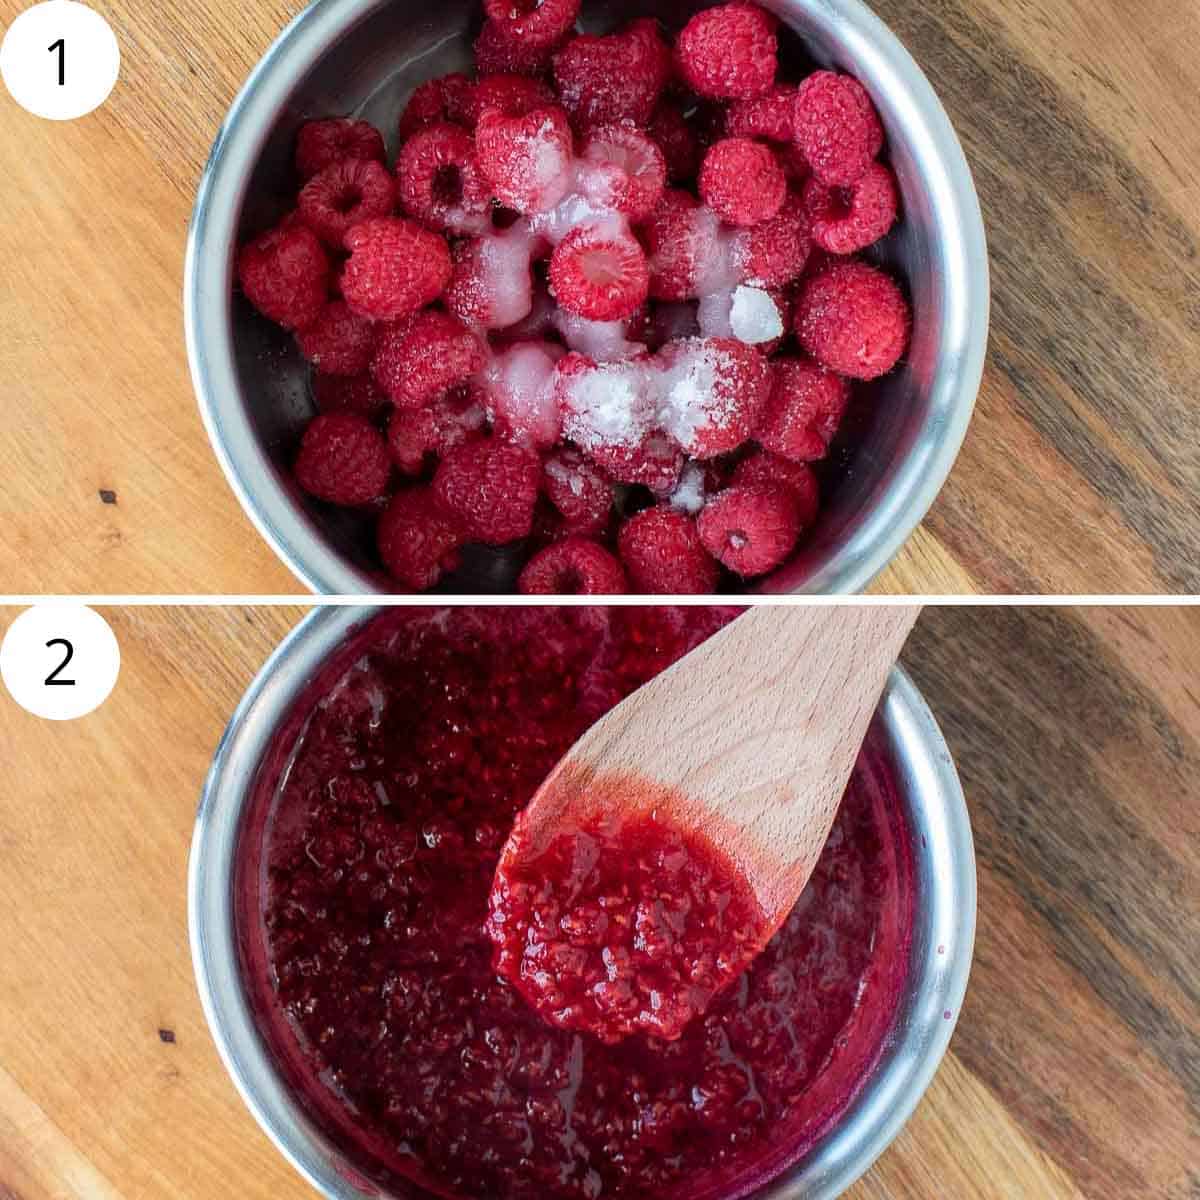 two images. top image is raspberries and white sugar in a saucepan. bottom image is raspberry compote in saucepan with wooden spoon lifting some out.